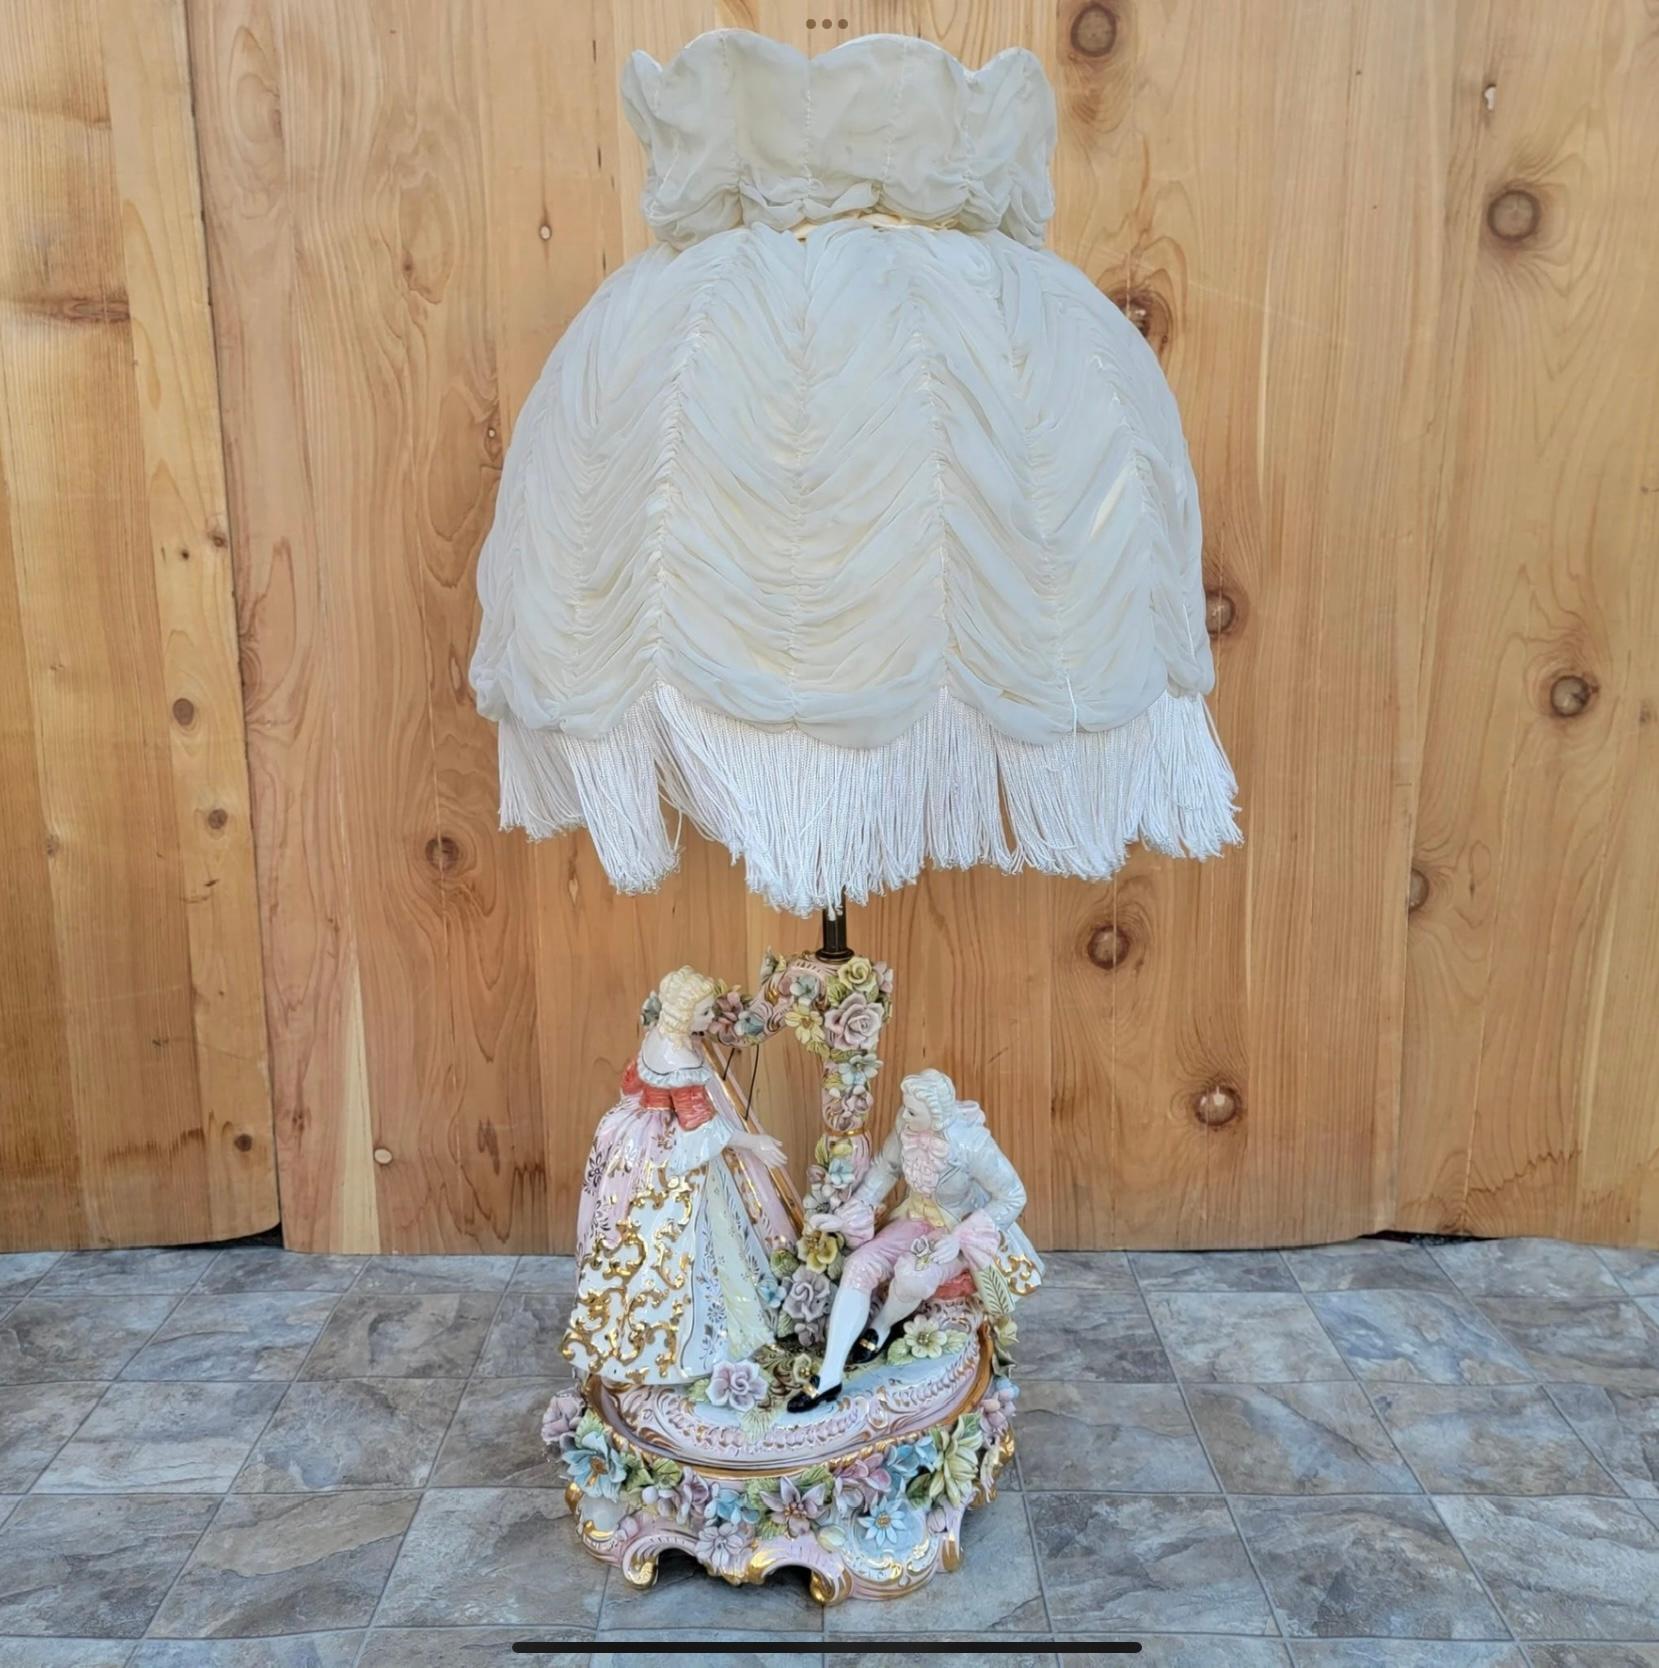 Vintage Victorian Italian Capodimonte Porcelain Table Lamp with Shade

This beautiful antique Capodimonte hand painted figurine table lamp is in great condition. It is depicting a lady playing the harp (a few strings are missing) for a gentleman. It